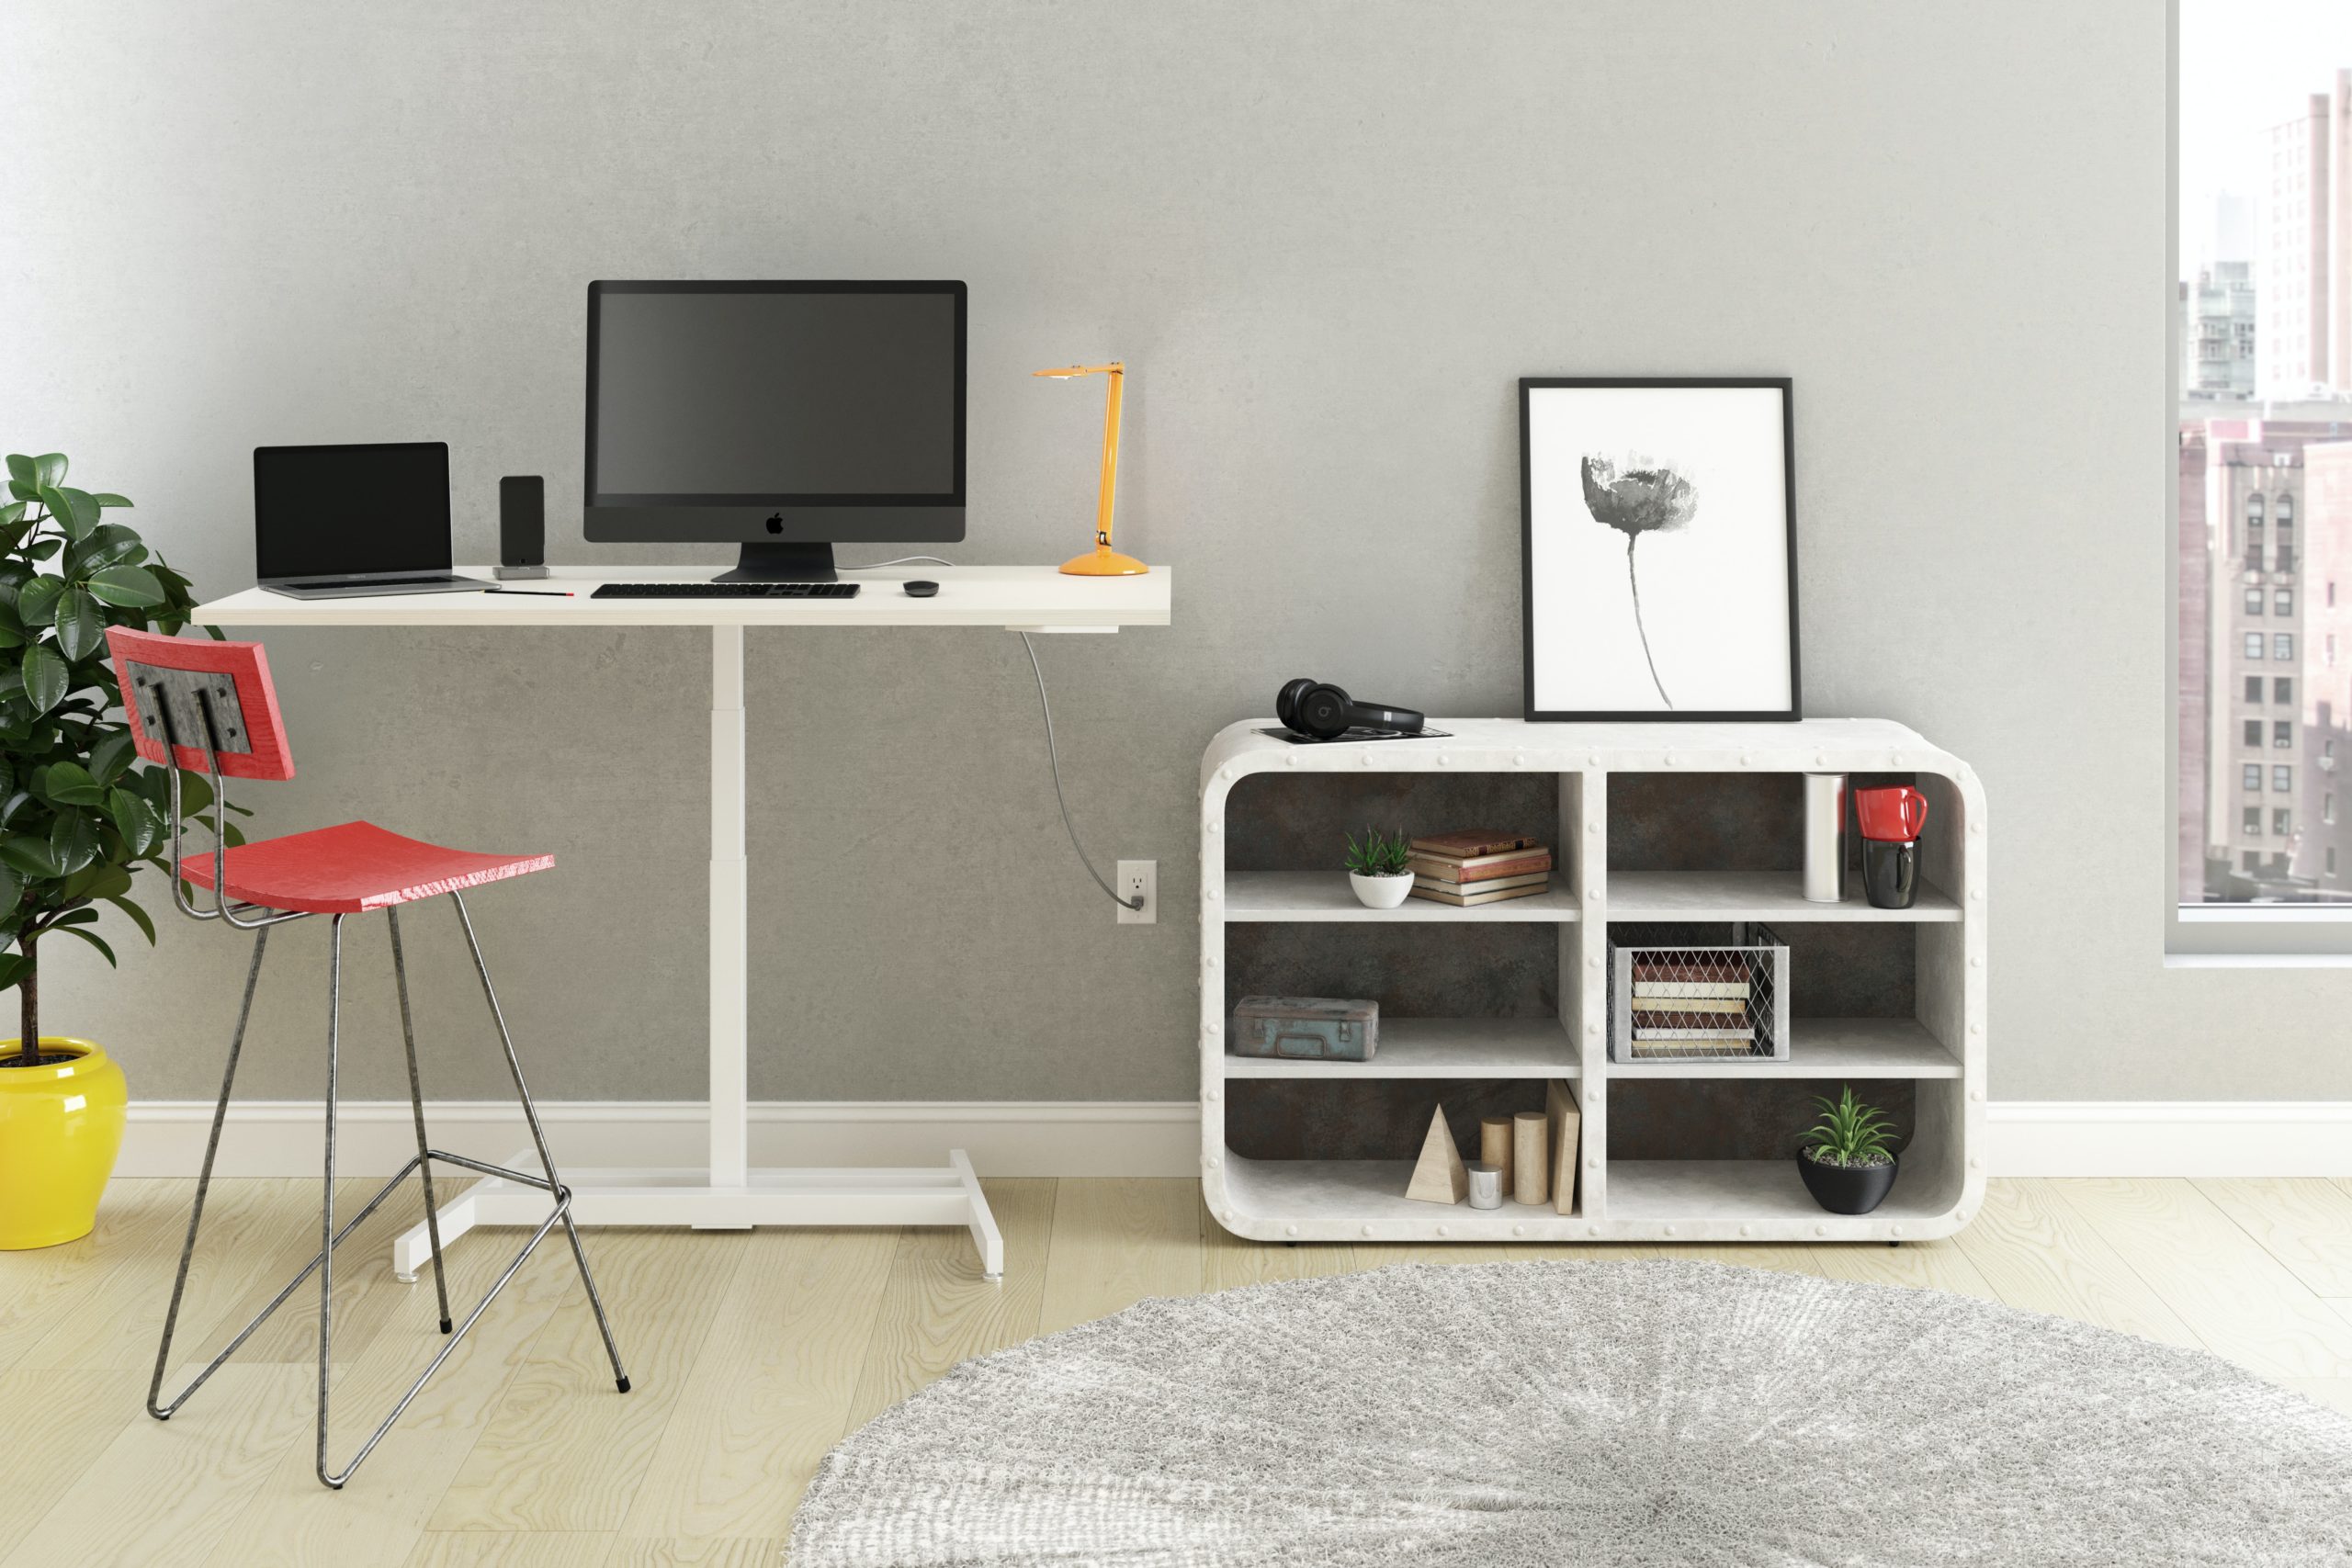 Creating a Functional Standing Desk Home Office Layout